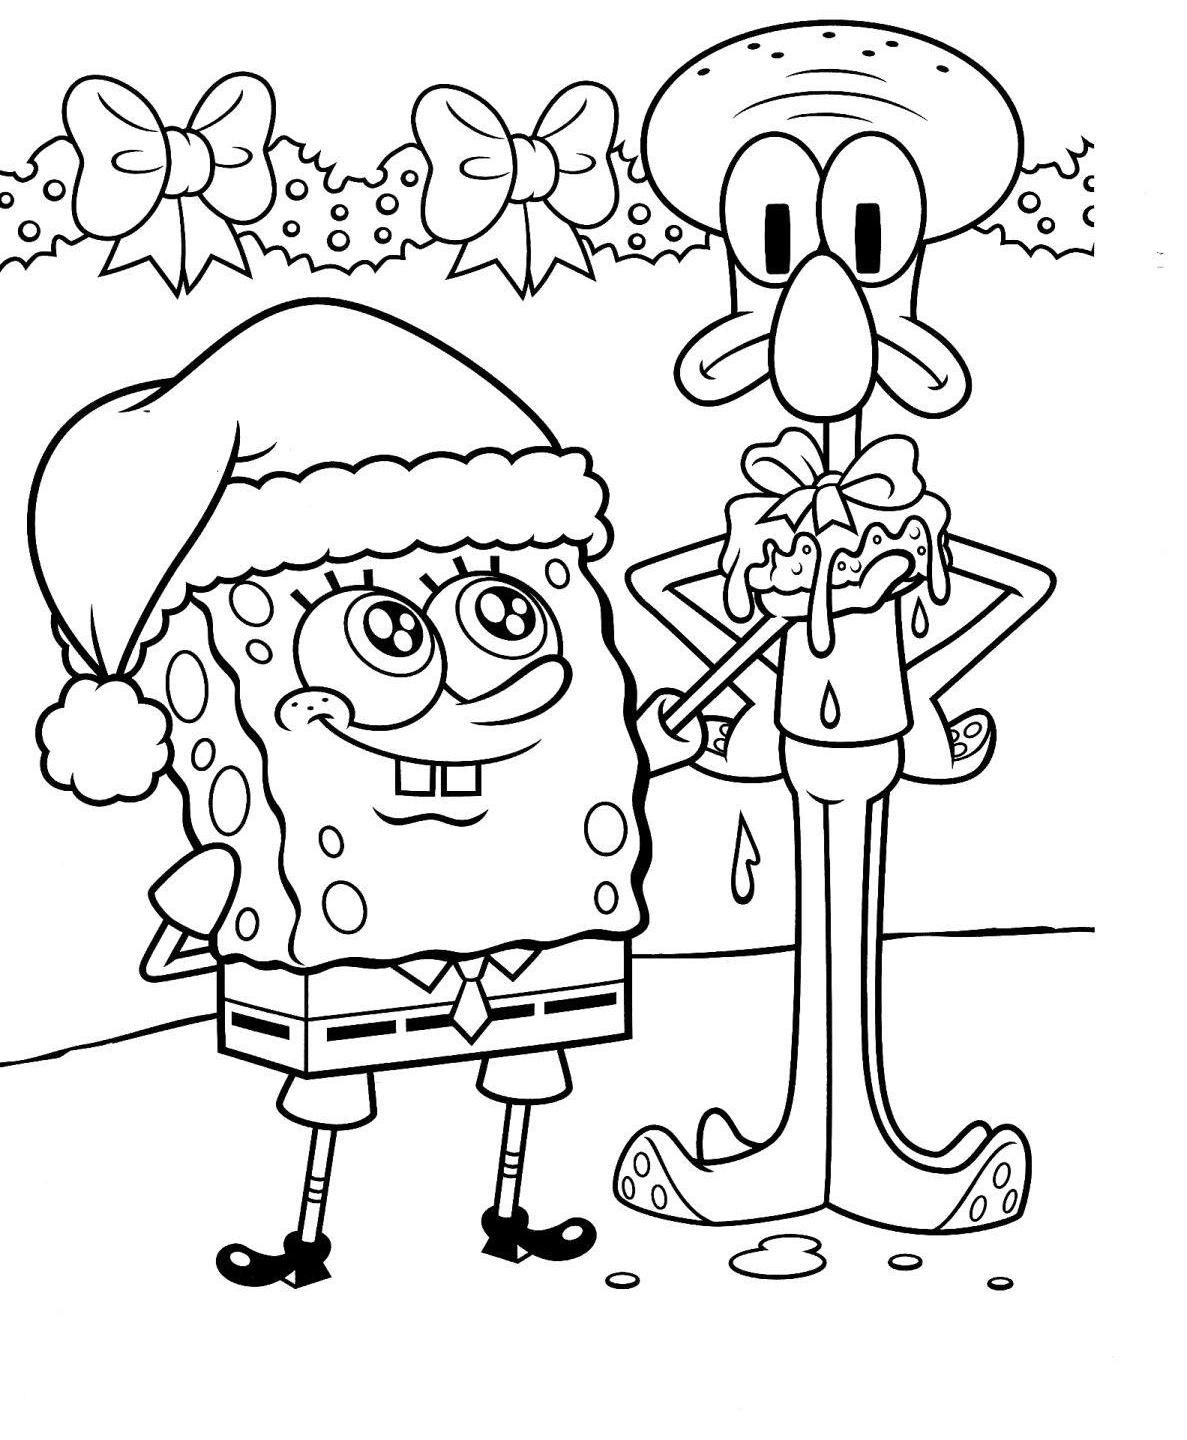 Free Coloring Pages For Christmas Children | Christmas Coloring ...